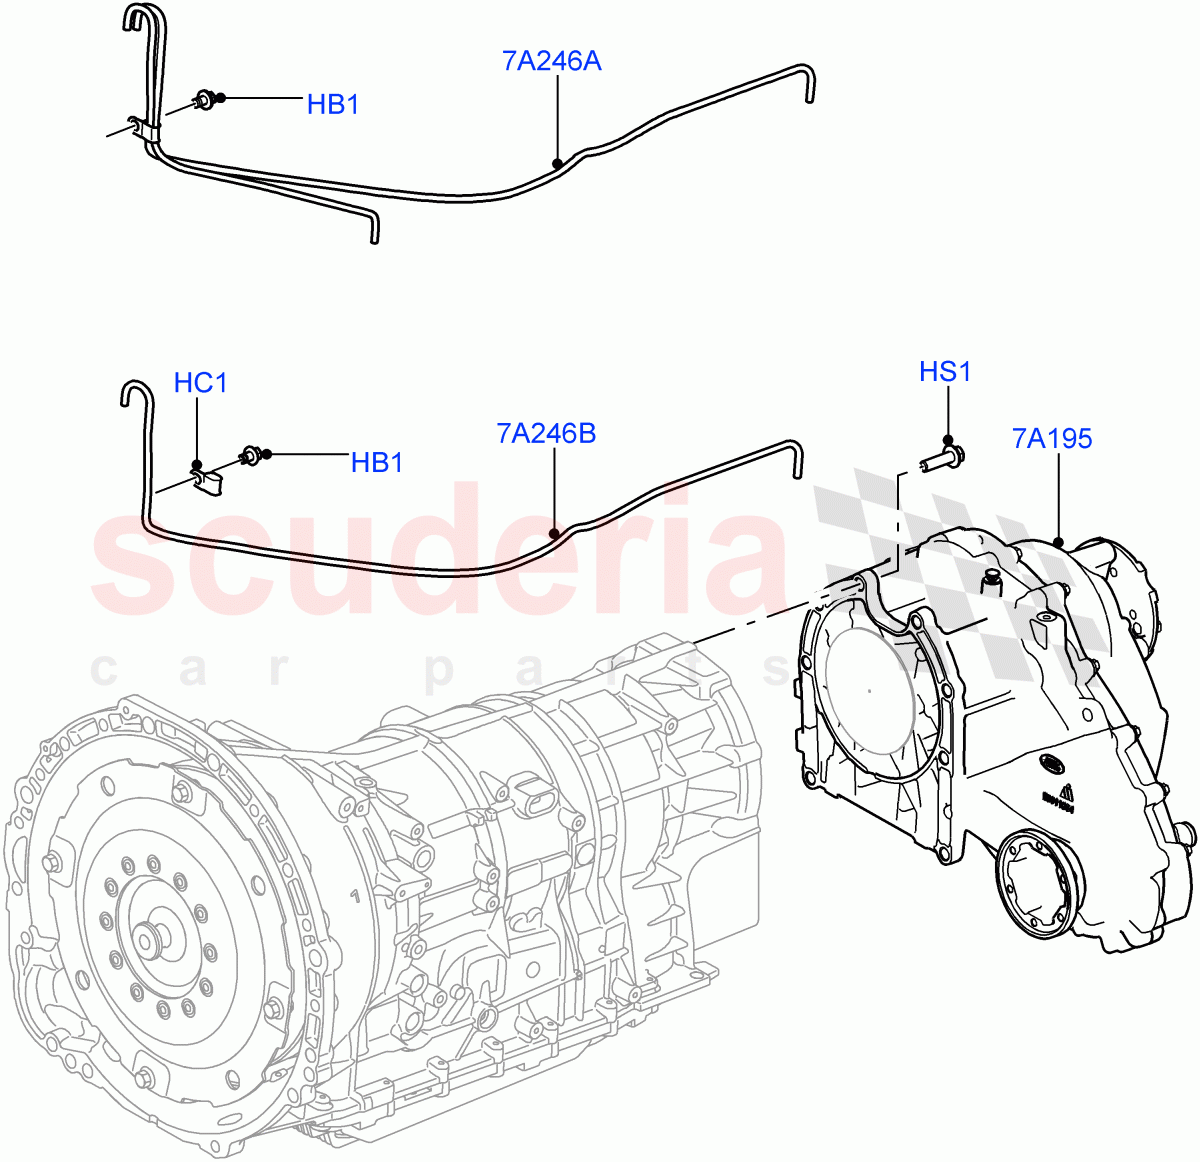 Transfer Drive Case(8 Speed Auto Trans ZF 8HP45,With 1 Speed Transfer Case,8 Speed Auto Trans ZF 8HP70 4WD)((V)FROMEA000001,(V)TOGA999999) of Land Rover Land Rover Range Rover Sport (2014+) [5.0 OHC SGDI SC V8 Petrol]